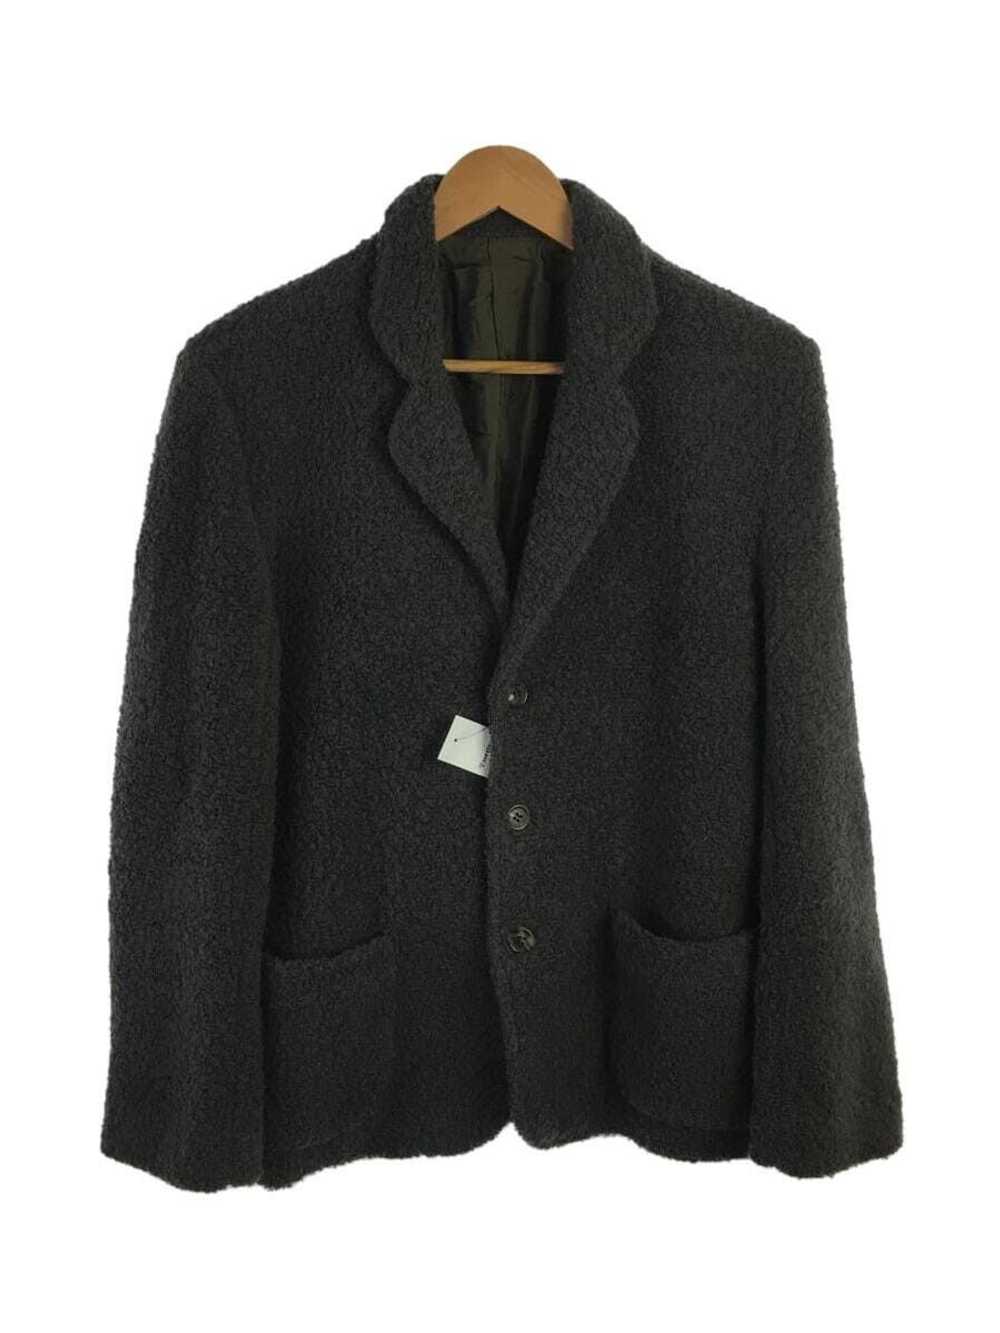 Undercover 🐎 AW01 D.A.V.F. Wool Blazer - image 1